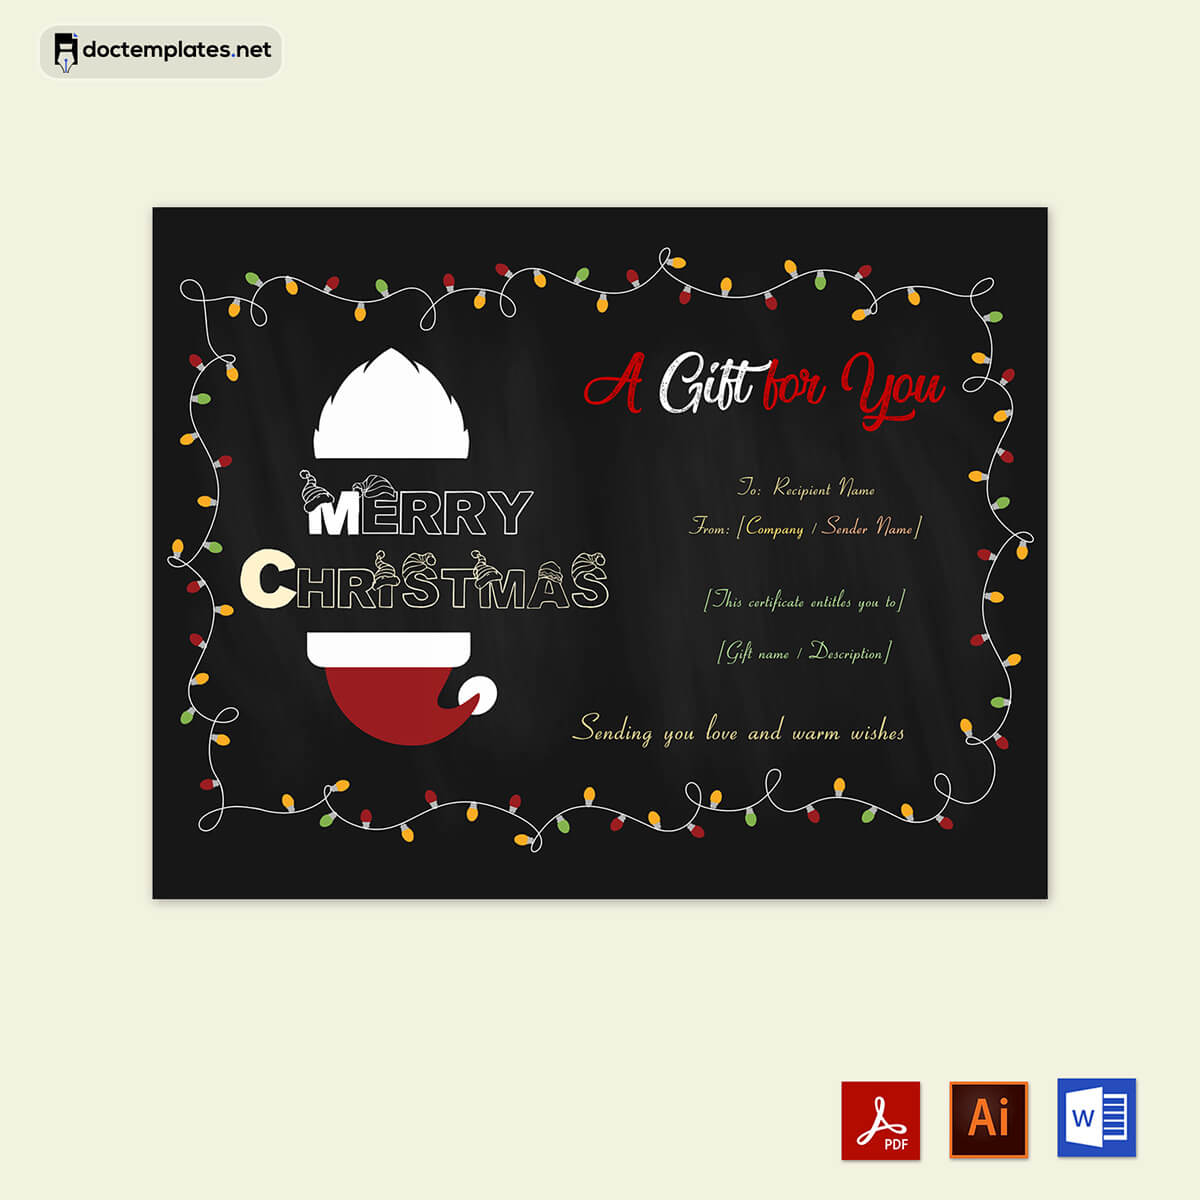 Image of Birthday gift certificate template
Birthday gift certificate template
